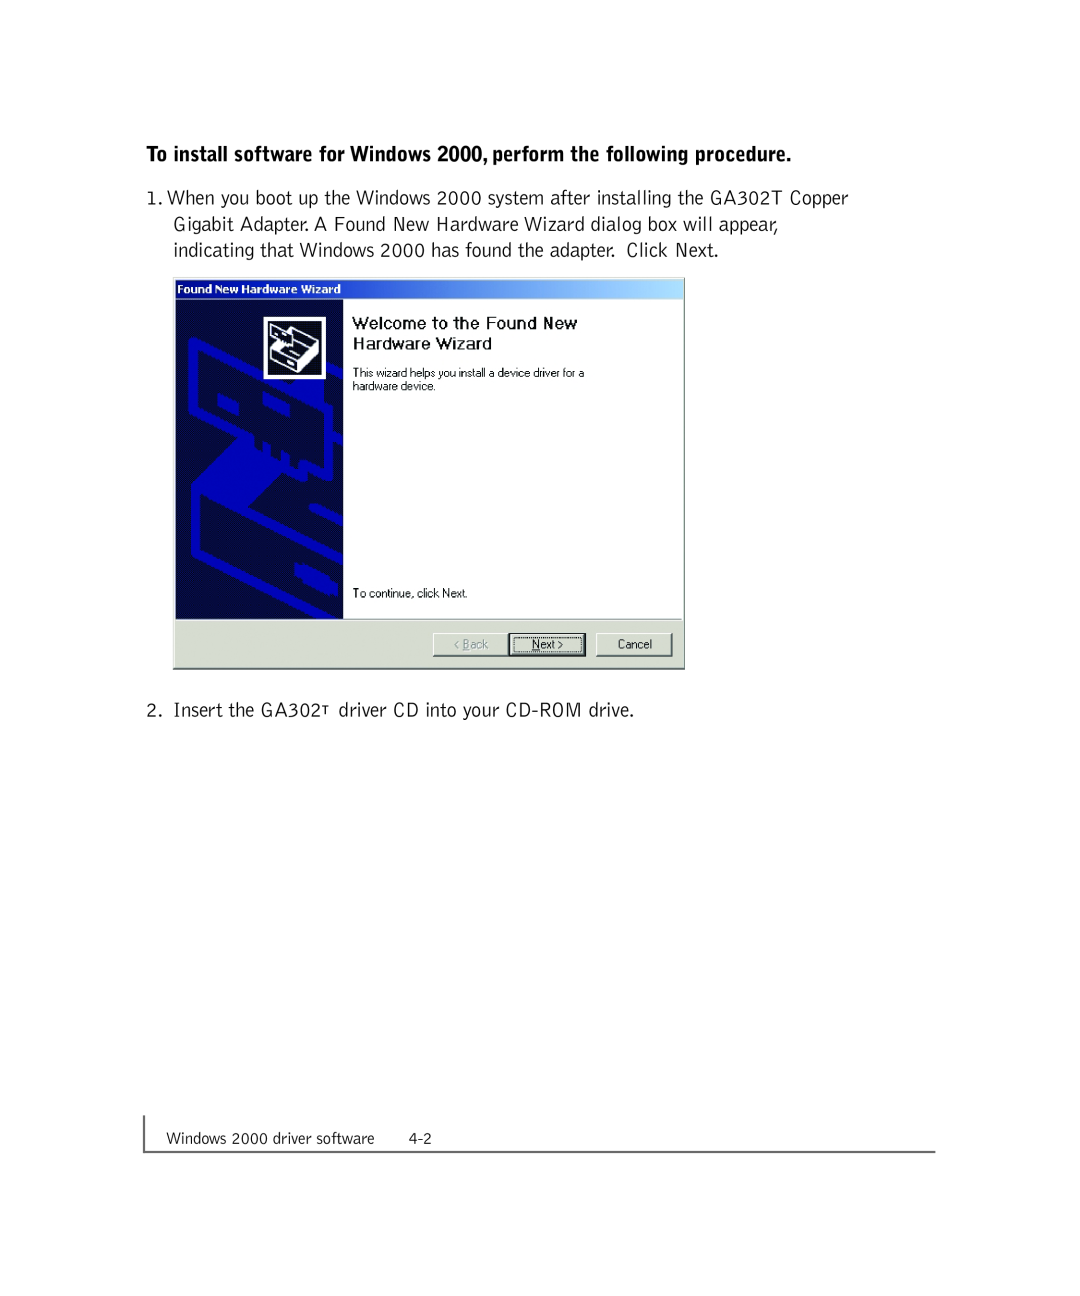 NETGEAR GA302T manual To install software for Windows 2000, perform the following procedure, Windows 2000 driver software 